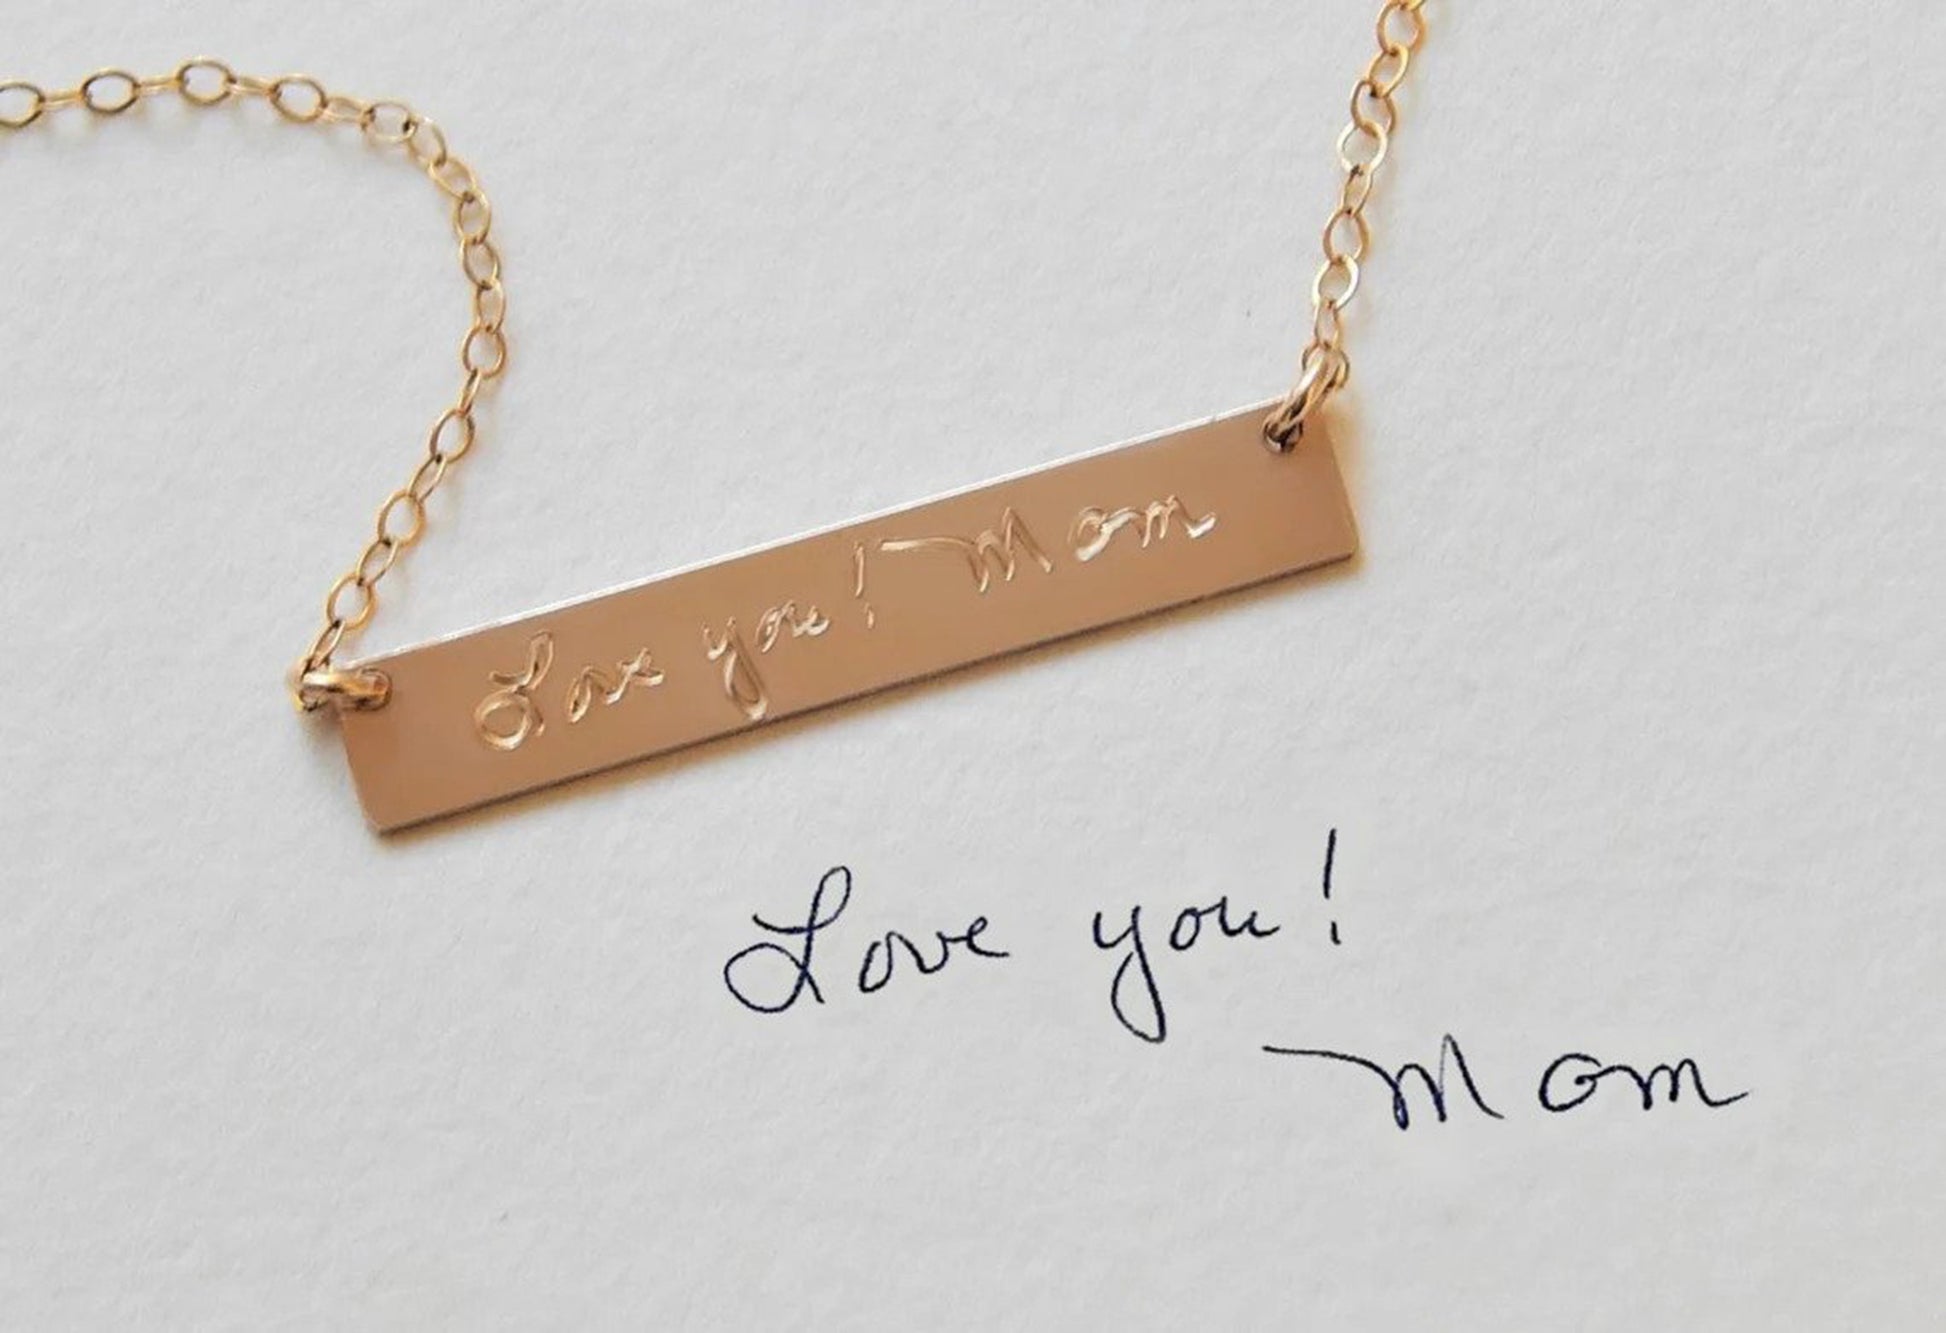 Custom gold filled keepsake jewelry by Gilded Sapphire shows engraved gold bar necklace with personalized message etched on its surface laying on a piece of paper with the same handwritten note engraved on the bar.